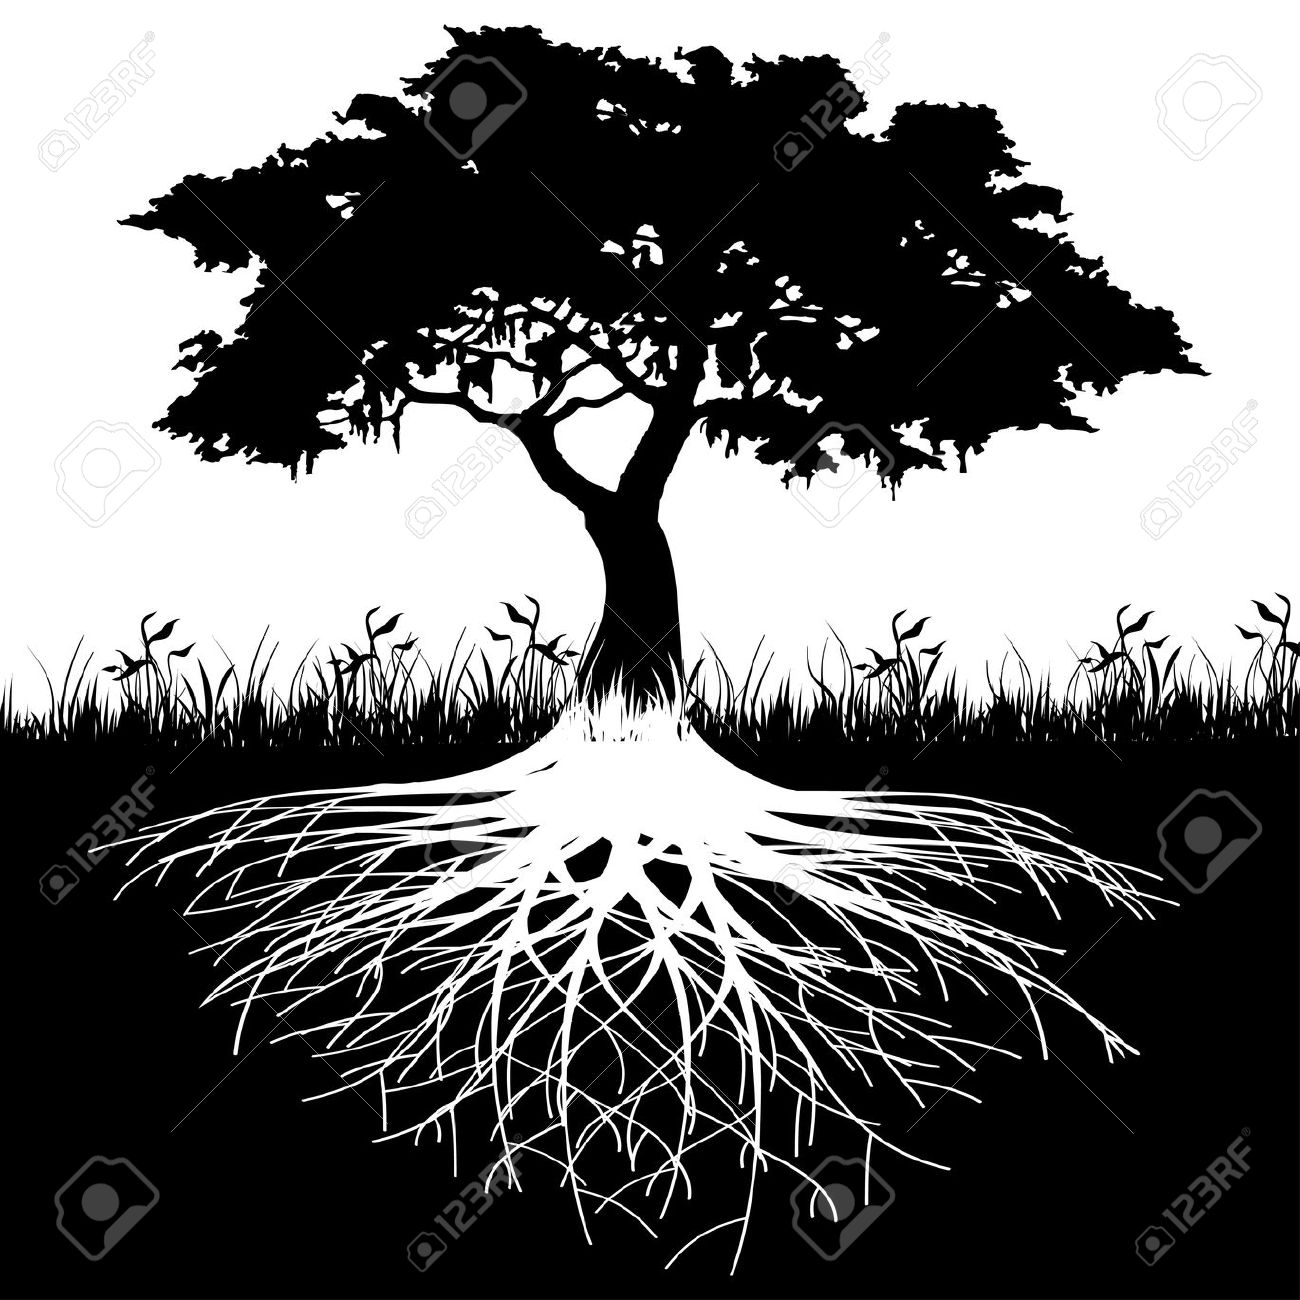 Tree Root clipart #2, Download drawings